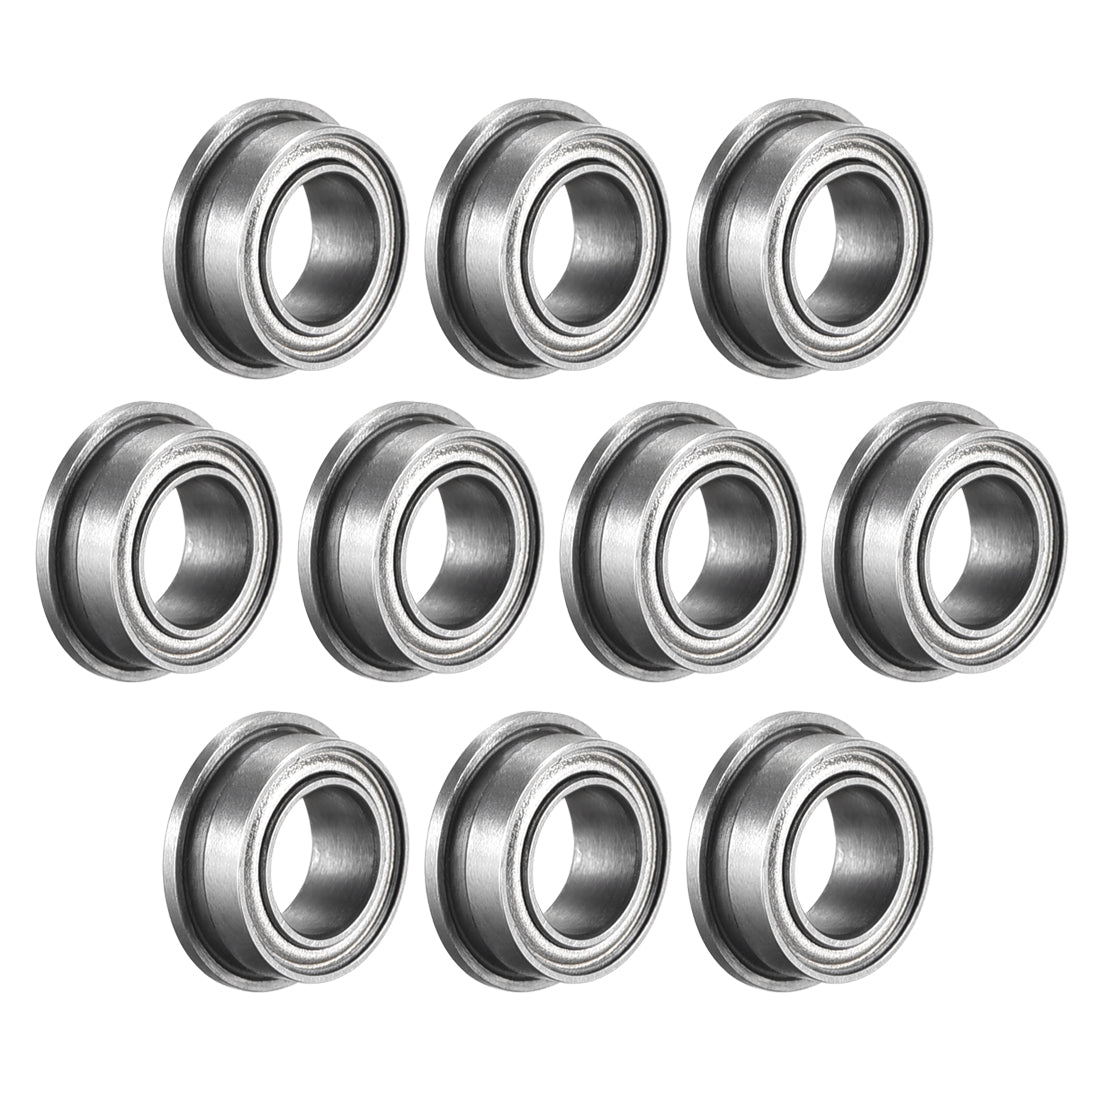 uxcell Uxcell FR156ZZ Flange Ball Bearing 3/16mmx5/16mmx1/8 Double Shielded Bearings 10 Pcs